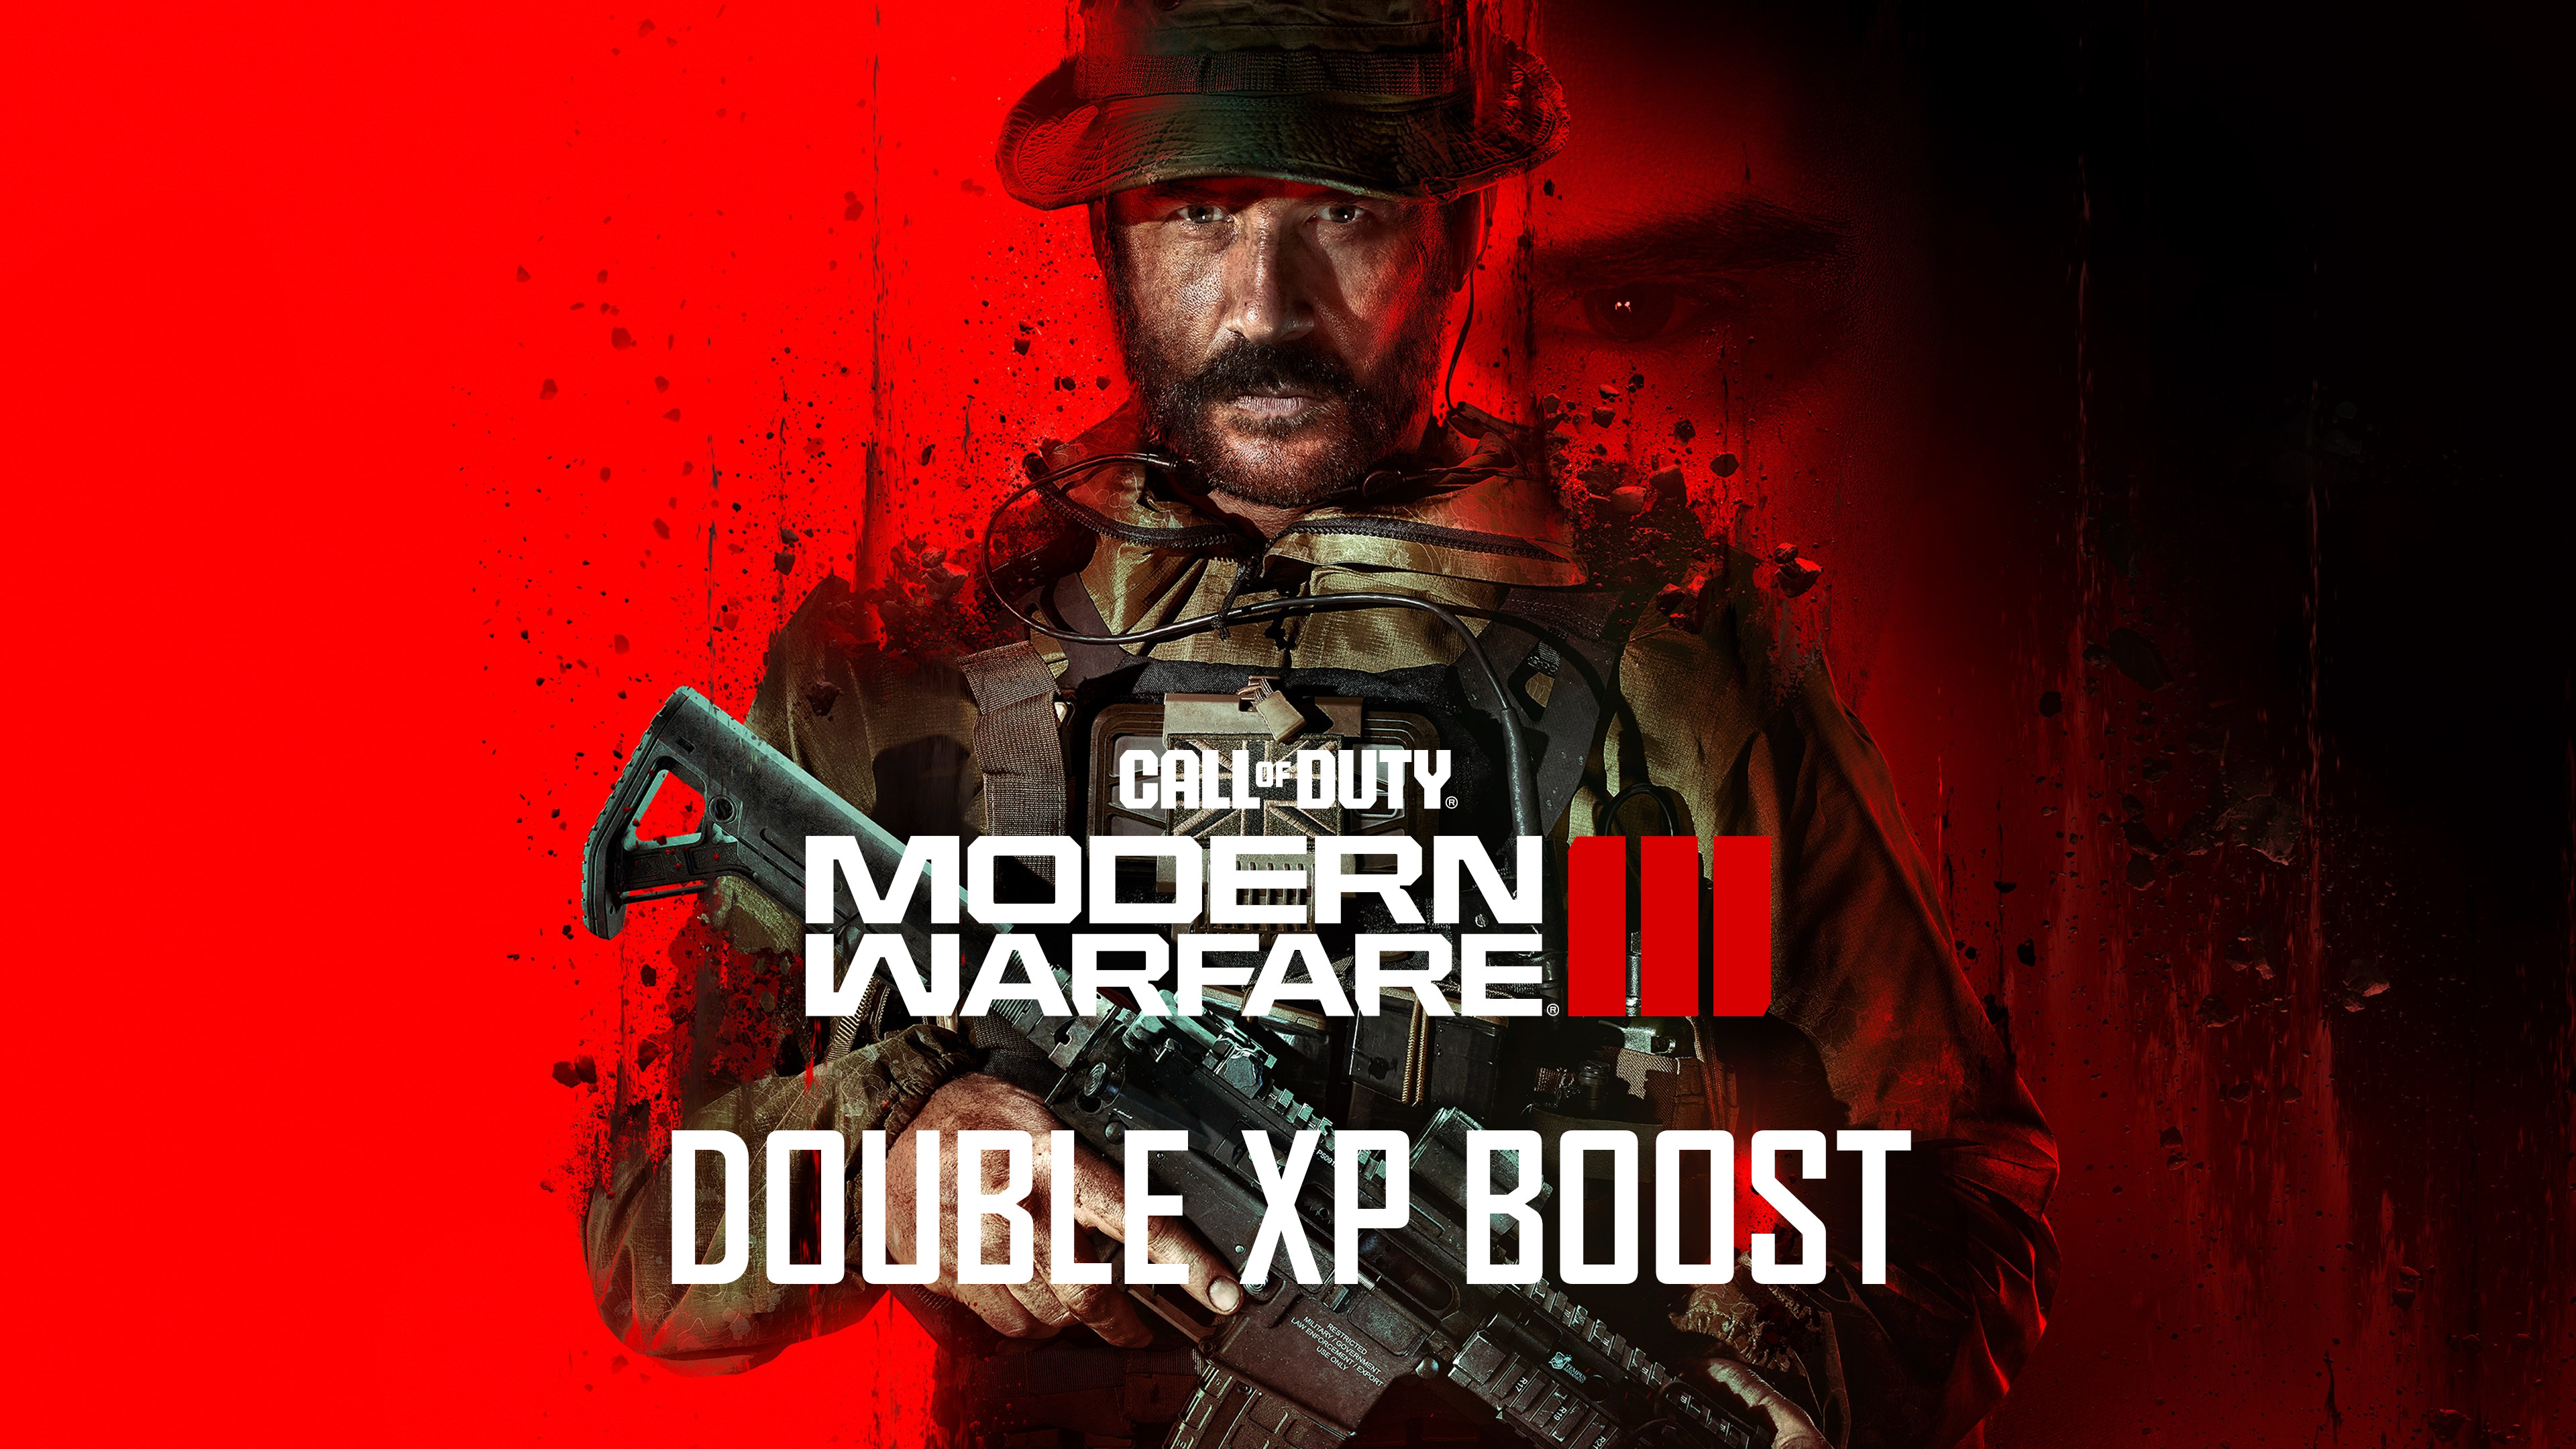 Call of Duty: Modern Warfare III / Warzone 2 - 1 Hour Double XP Boost PC/PS4/PS5/XBOX One/Series X|S CD Key 1.12$